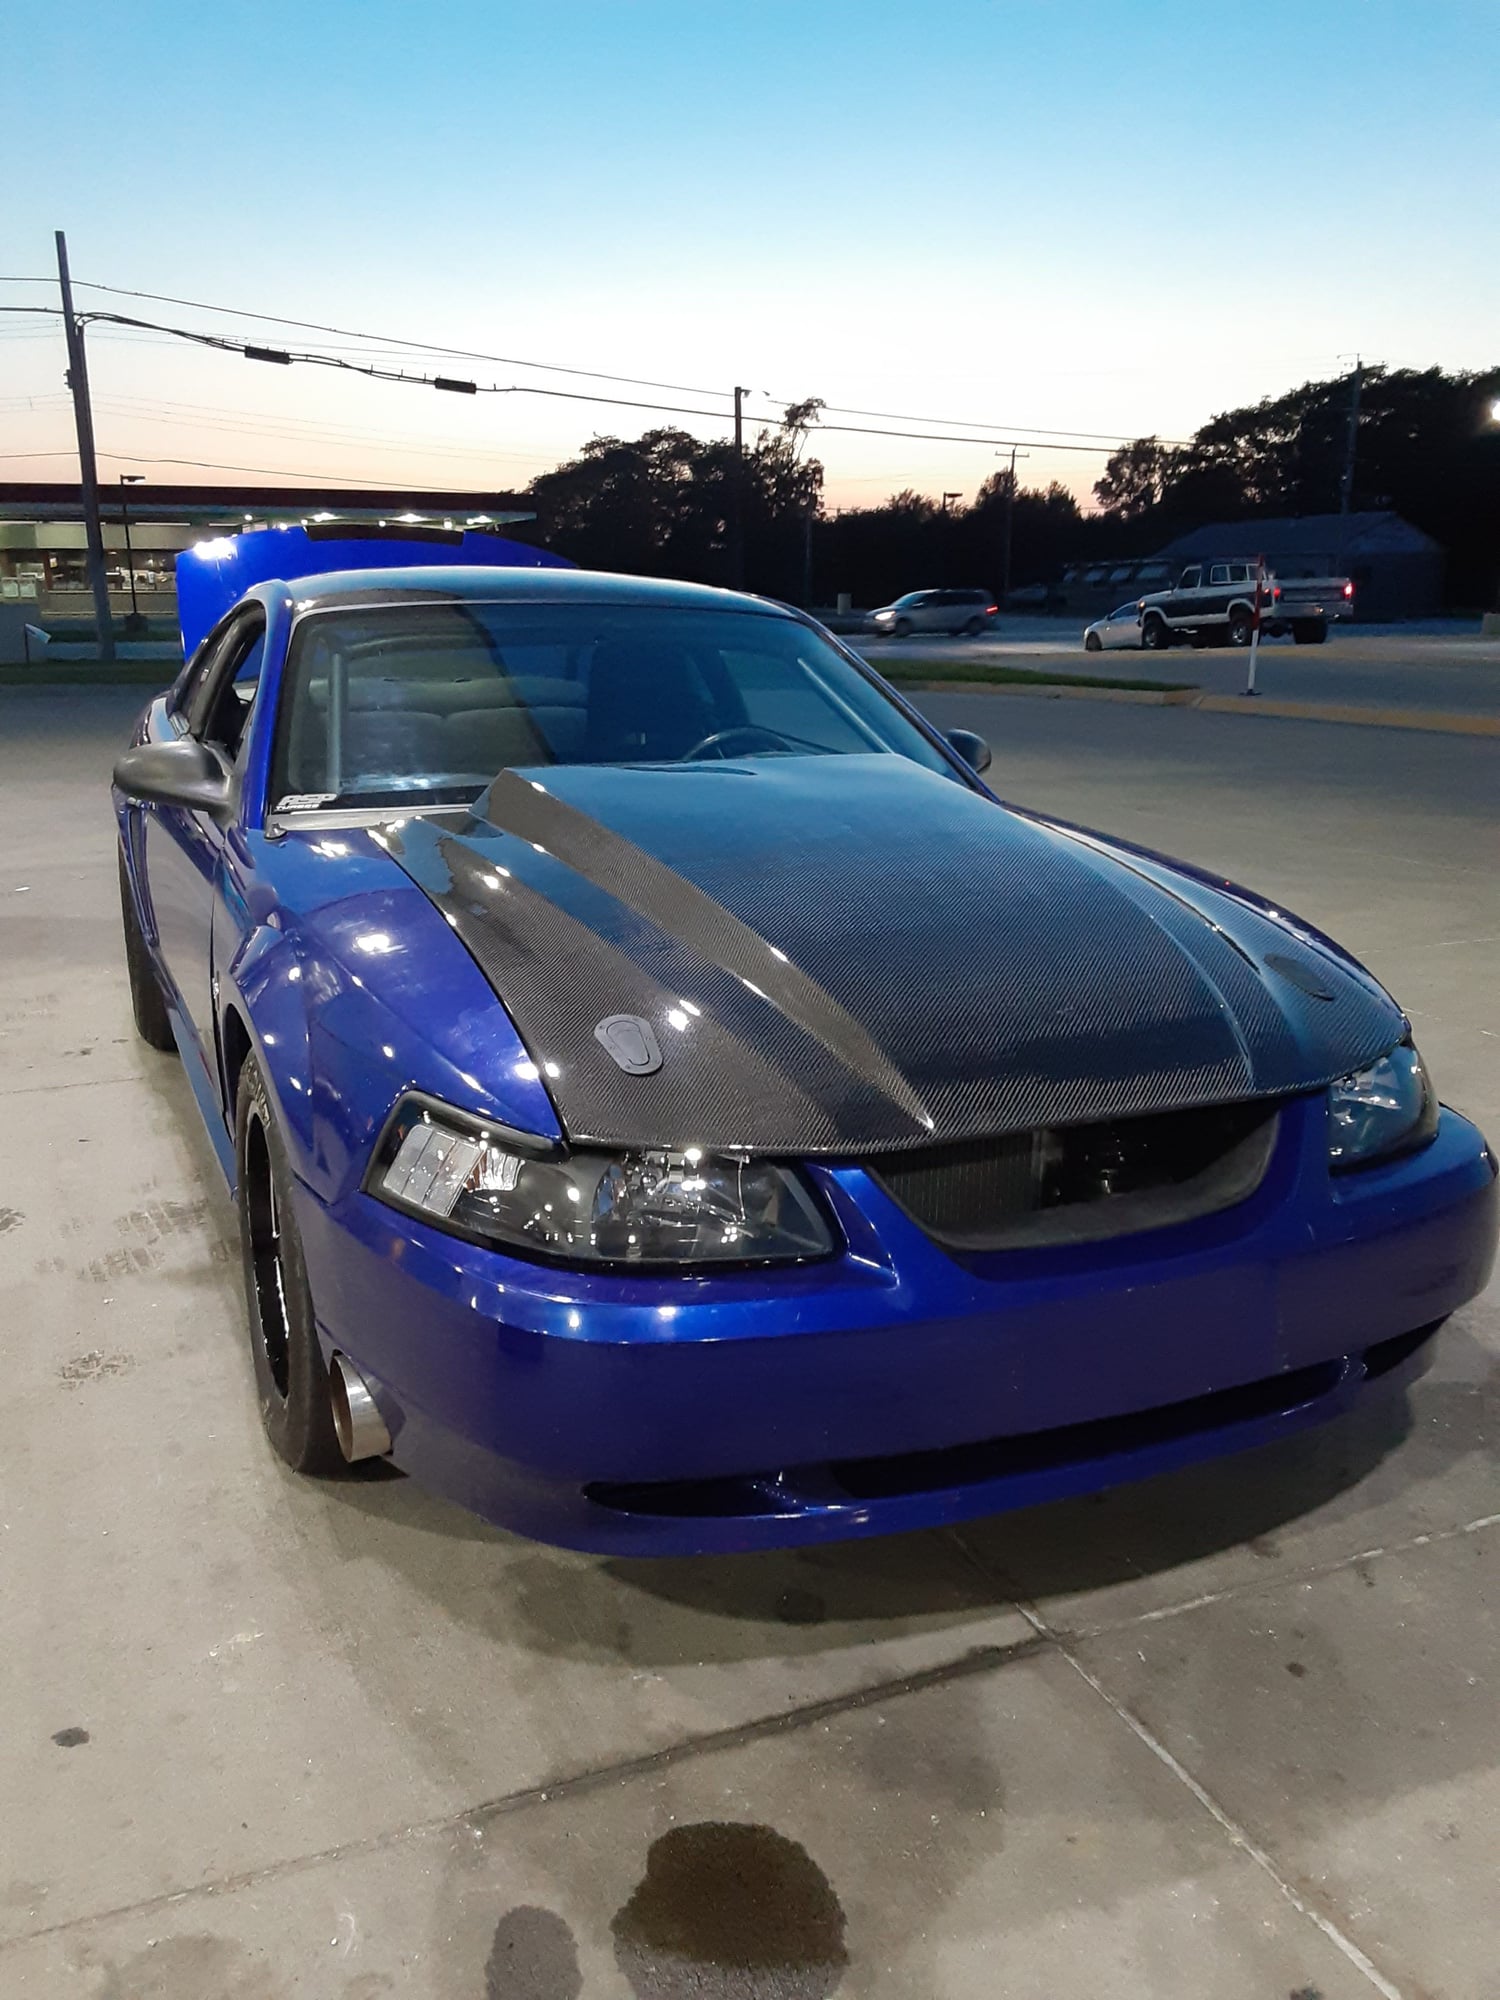 2002 Ford Mustang - 2002 mustang L33 turbo - Used - VIN 1LNHM81WX5Y661564 - 1 Miles - 8 cyl - 2WD - Automatic - Coupe - Blue - Roseville, IL 61473, United States